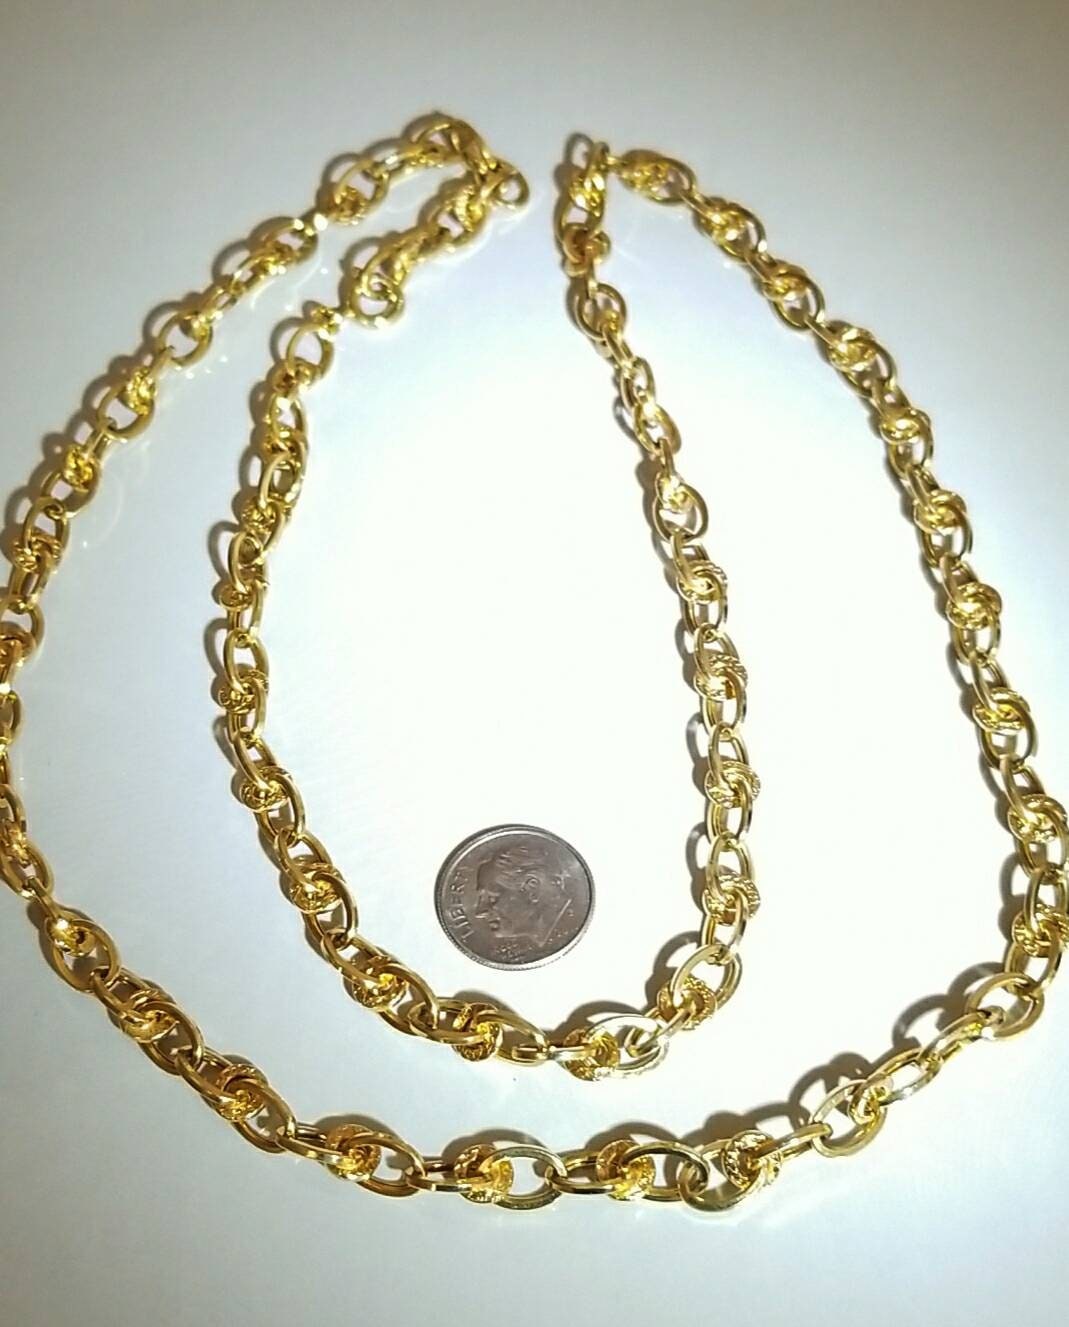 Marked 14K Yellow Gold Fancy Chain Style Necklace | Etsy